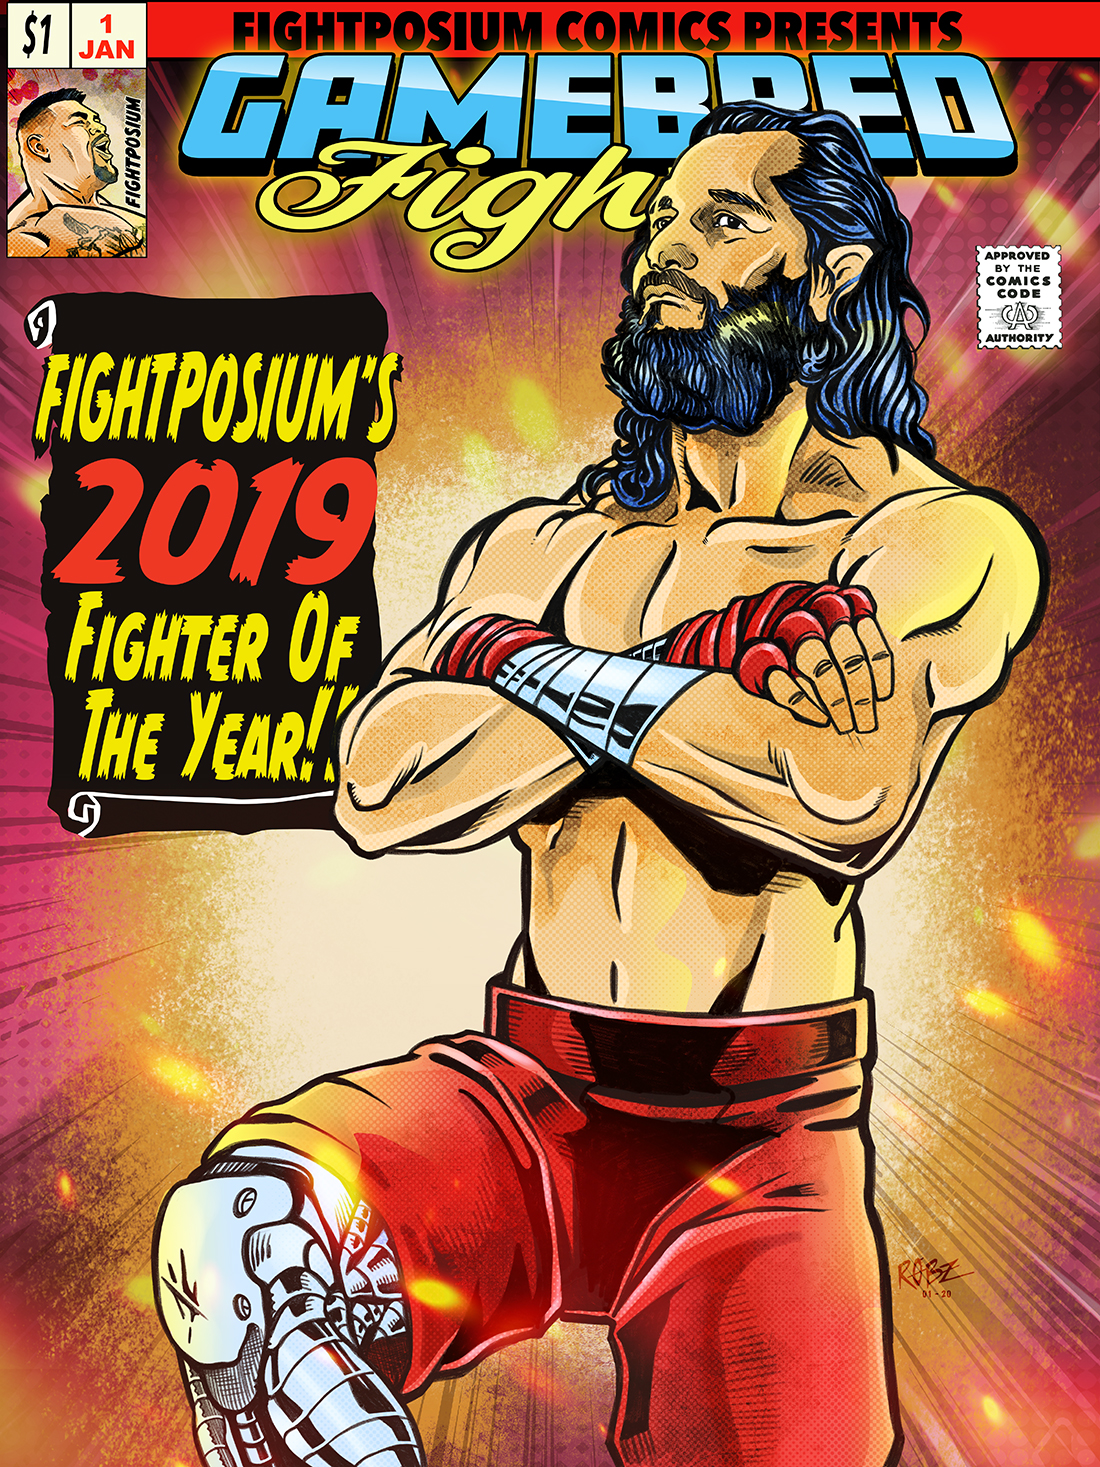 You are currently viewing Jorge “Gamebred Fighter” Masvidal – Fightposium’s 2019 MMA Fighter Of The Year!